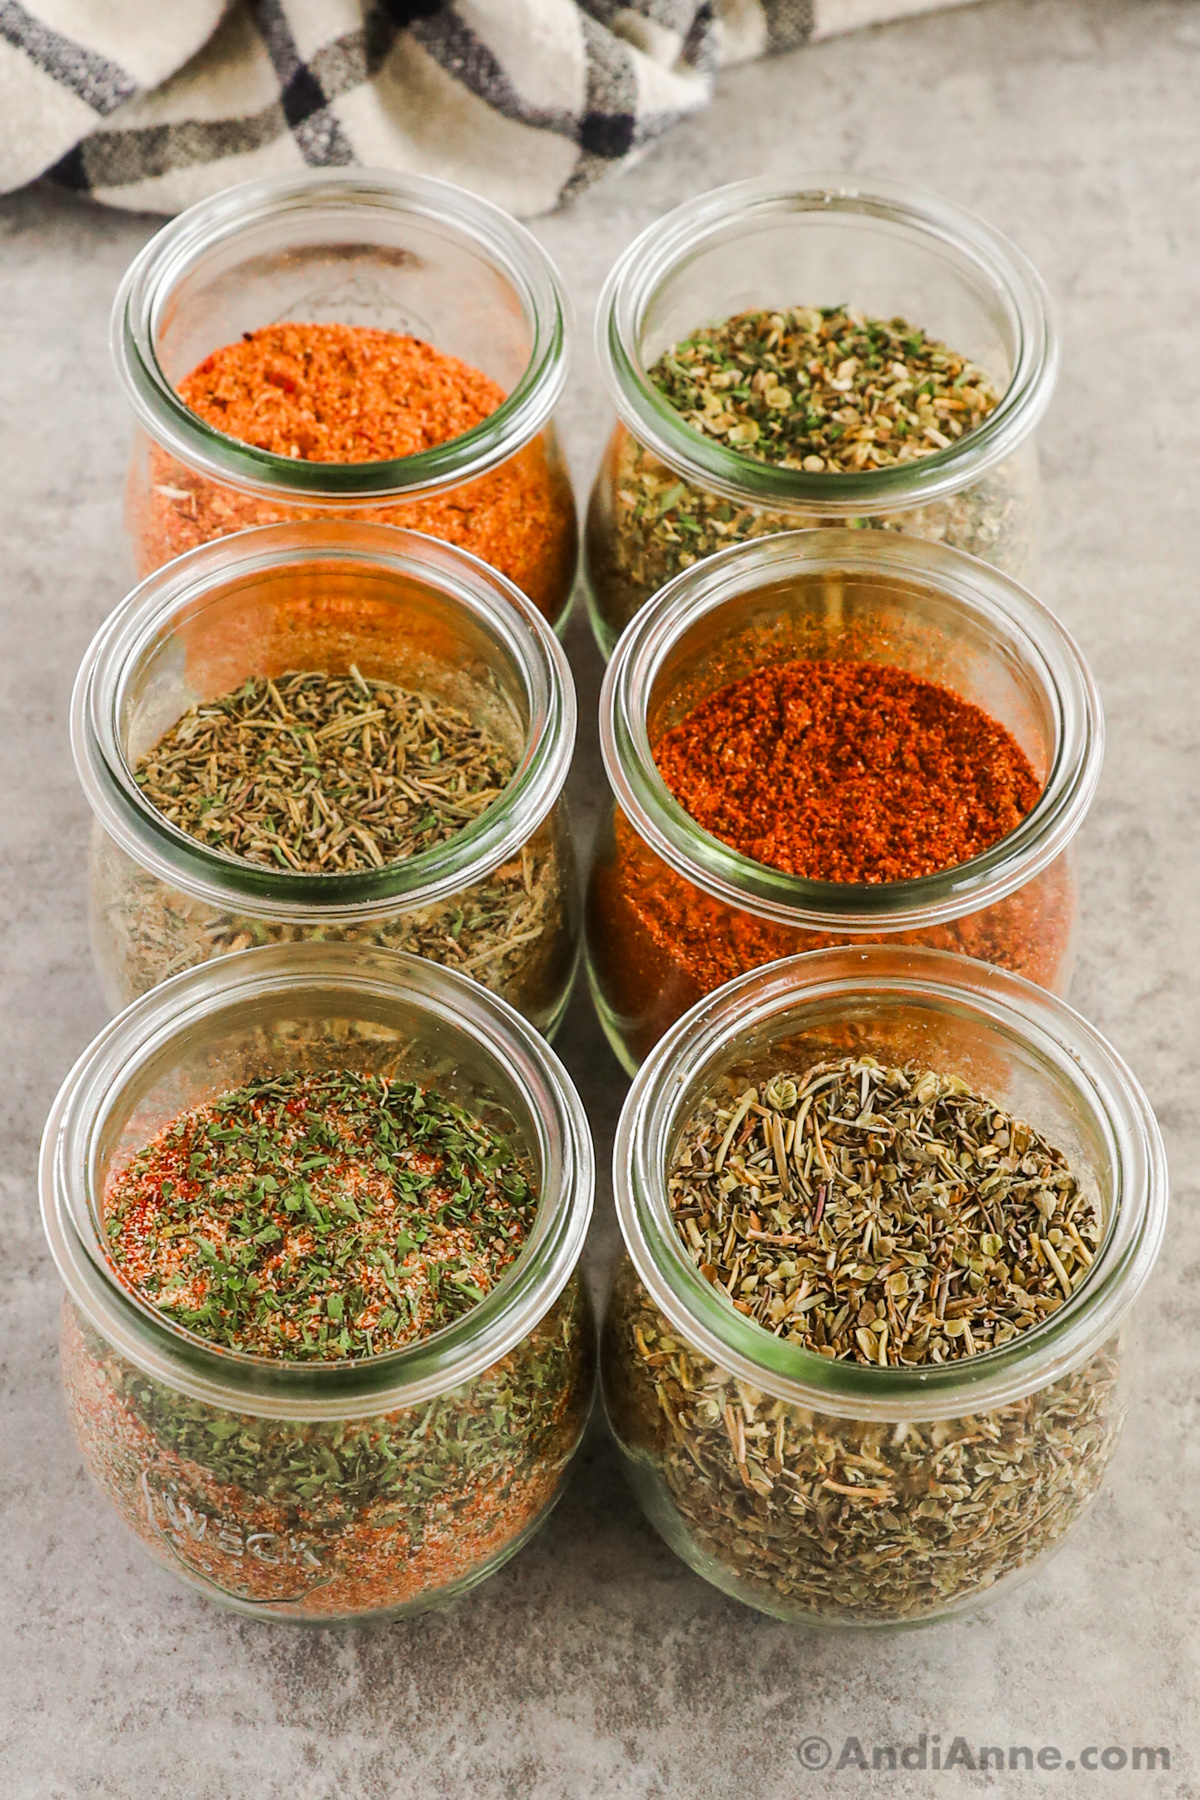 Six small jars with various spice mixes in each.